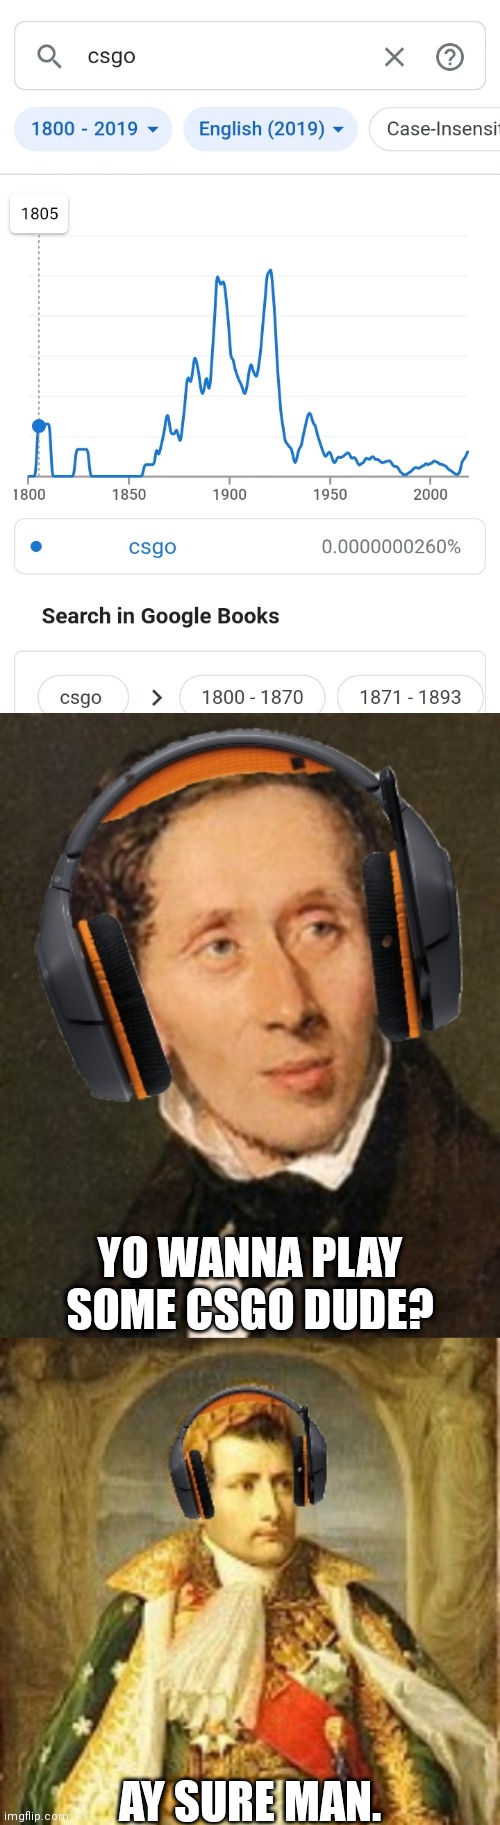 csgo in 1805 |  YO WANNA PLAY SOME CSGO DUDE? AY SURE MAN. | image tagged in memes,funny,historical meme | made w/ Imgflip meme maker